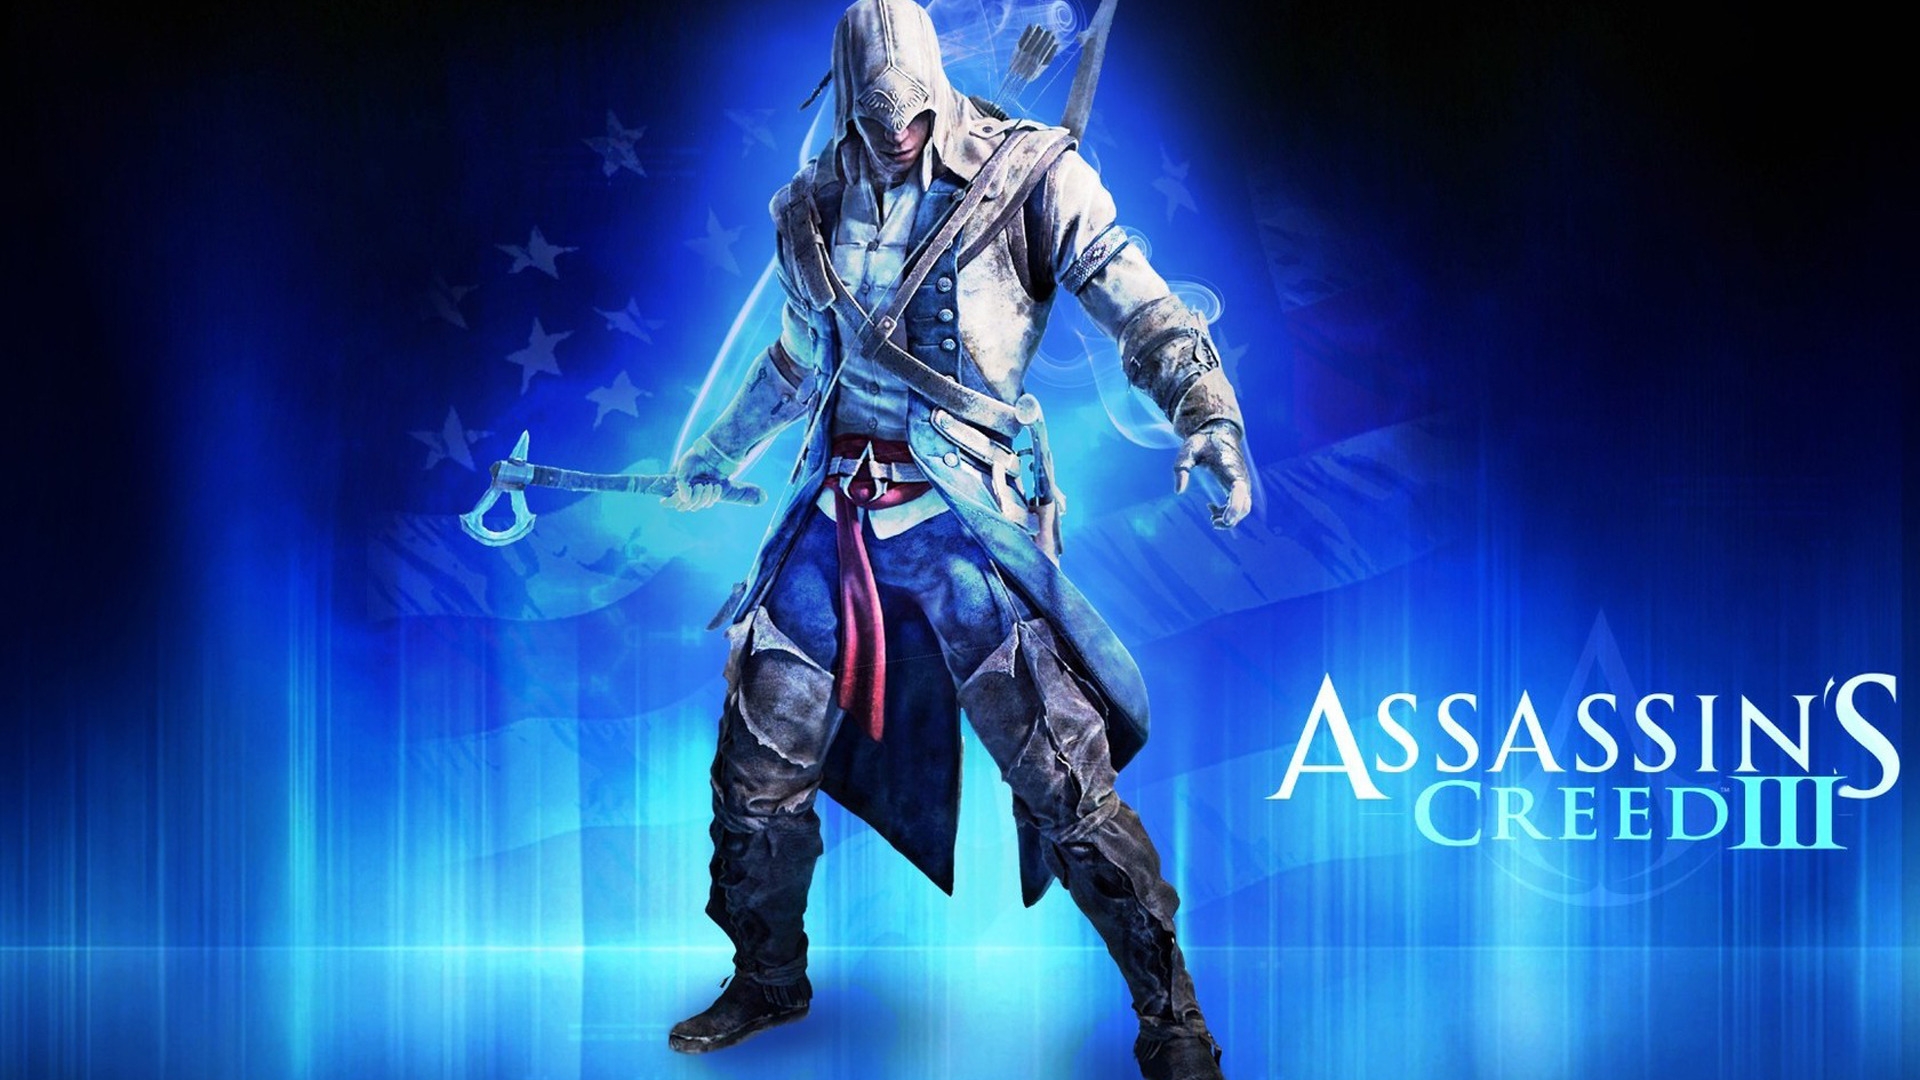 Assassin Creed III for 1920 x 1080 HDTV 1080p resolution